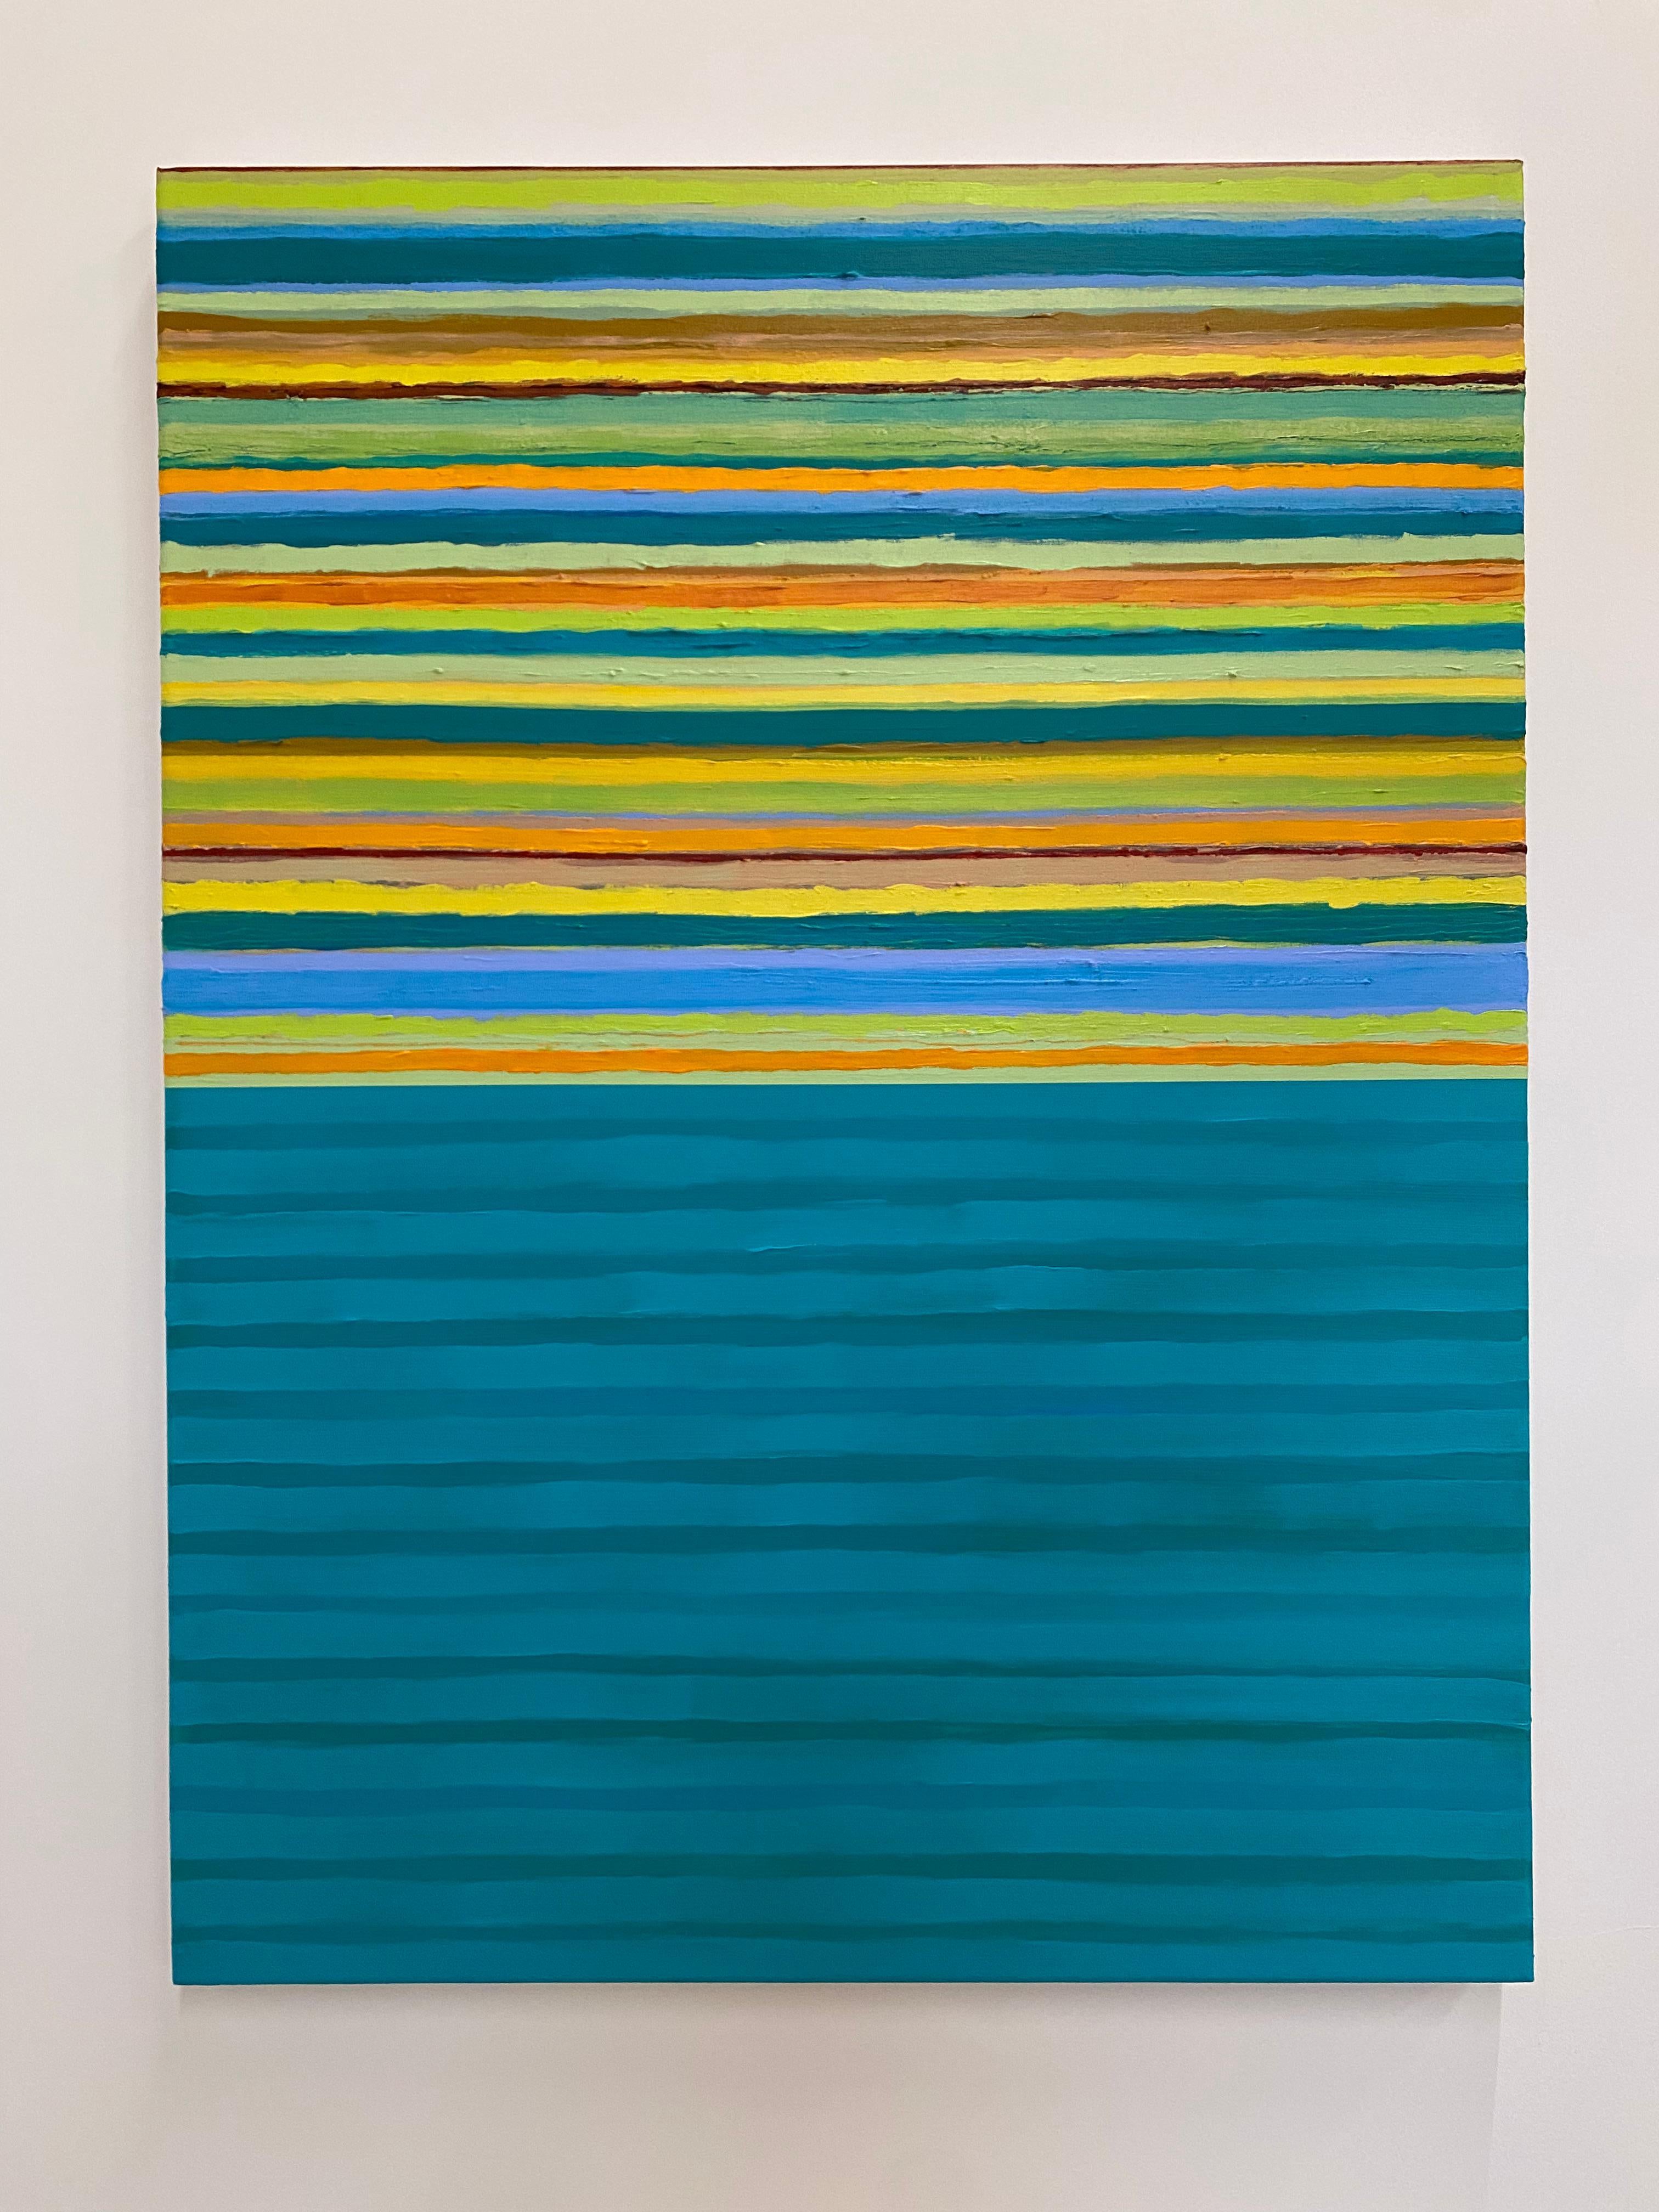 Tutto Eight, Light Teal Blue, Lime Green, Golden Yellow Orange Stripes - Contemporary Painting by Joanne Mattera